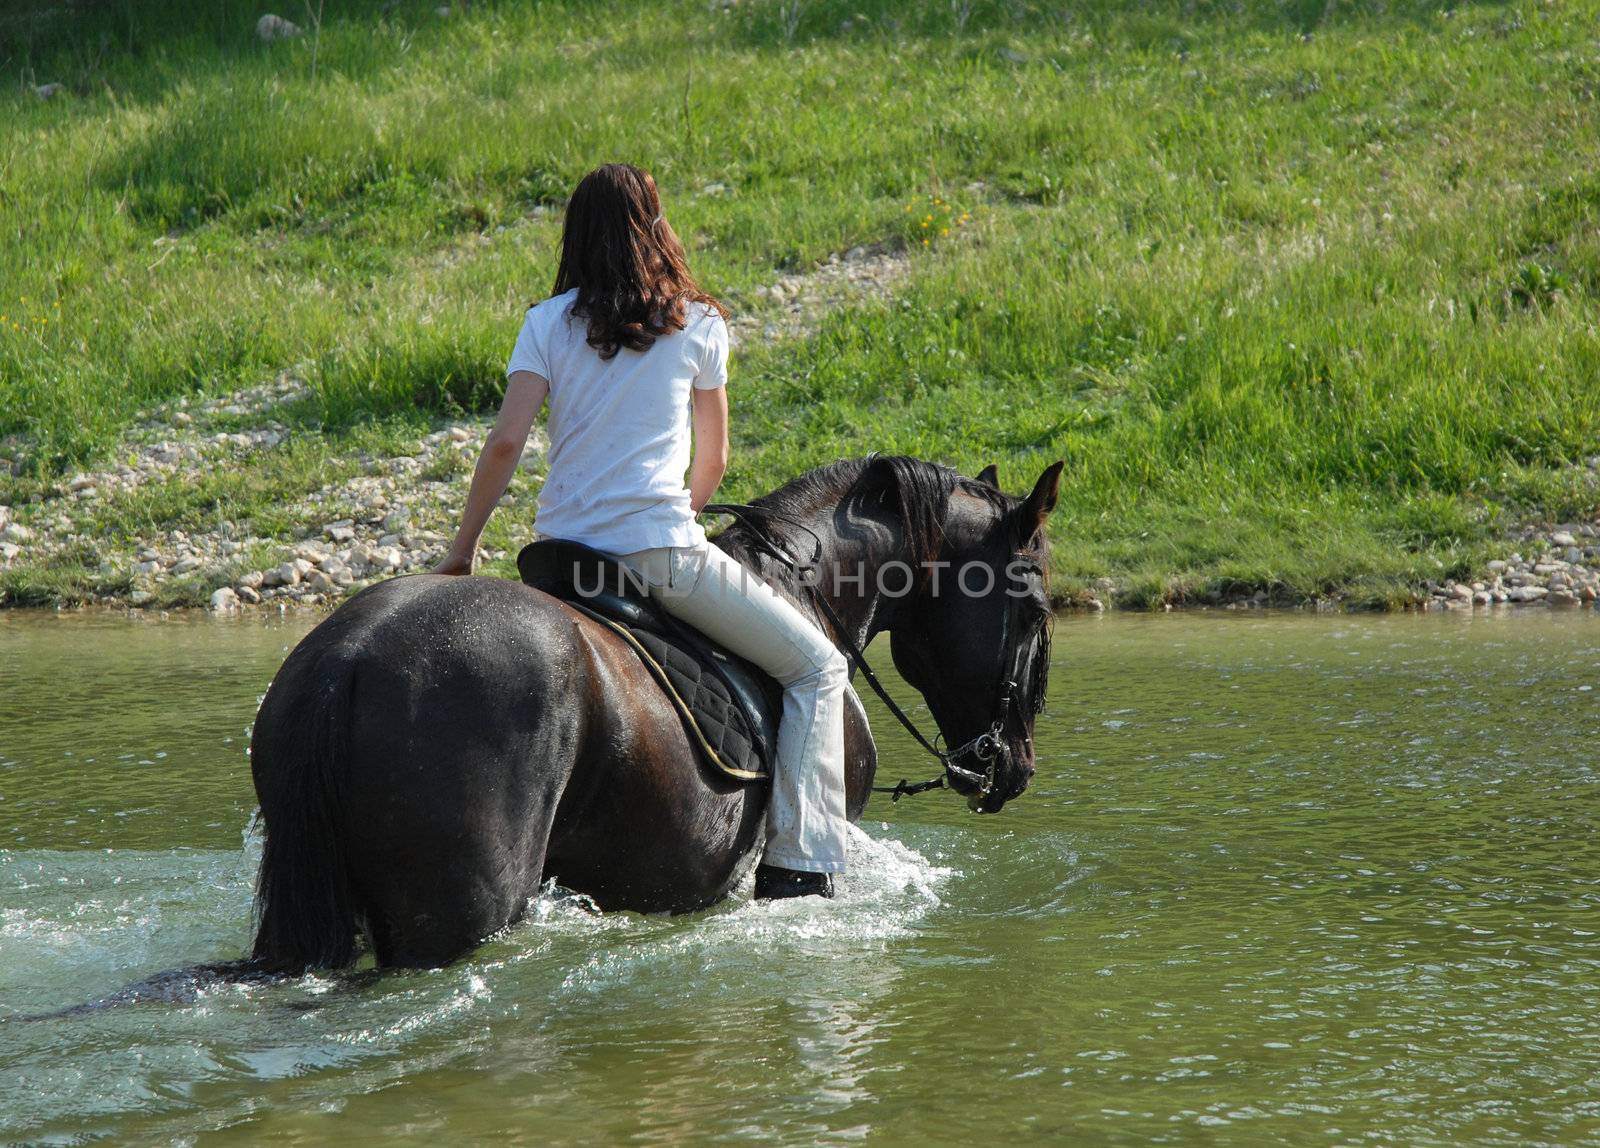 riding woman in river by cynoclub